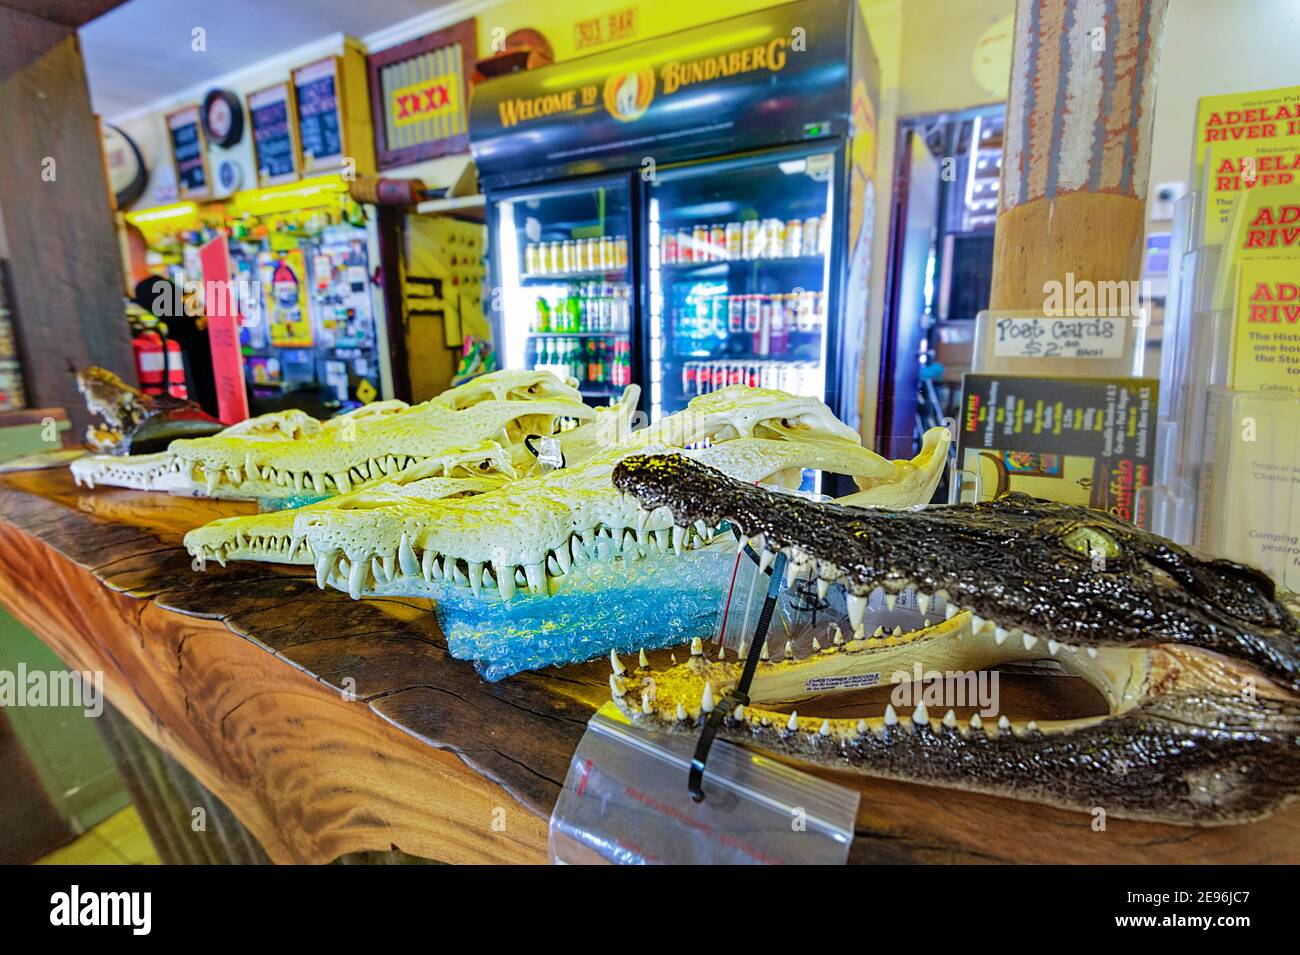 Tacky souvenirs of crocodile heads sold in an Outback pub, Adelaide River, Northern Territory, NT, Australia Stock Photo